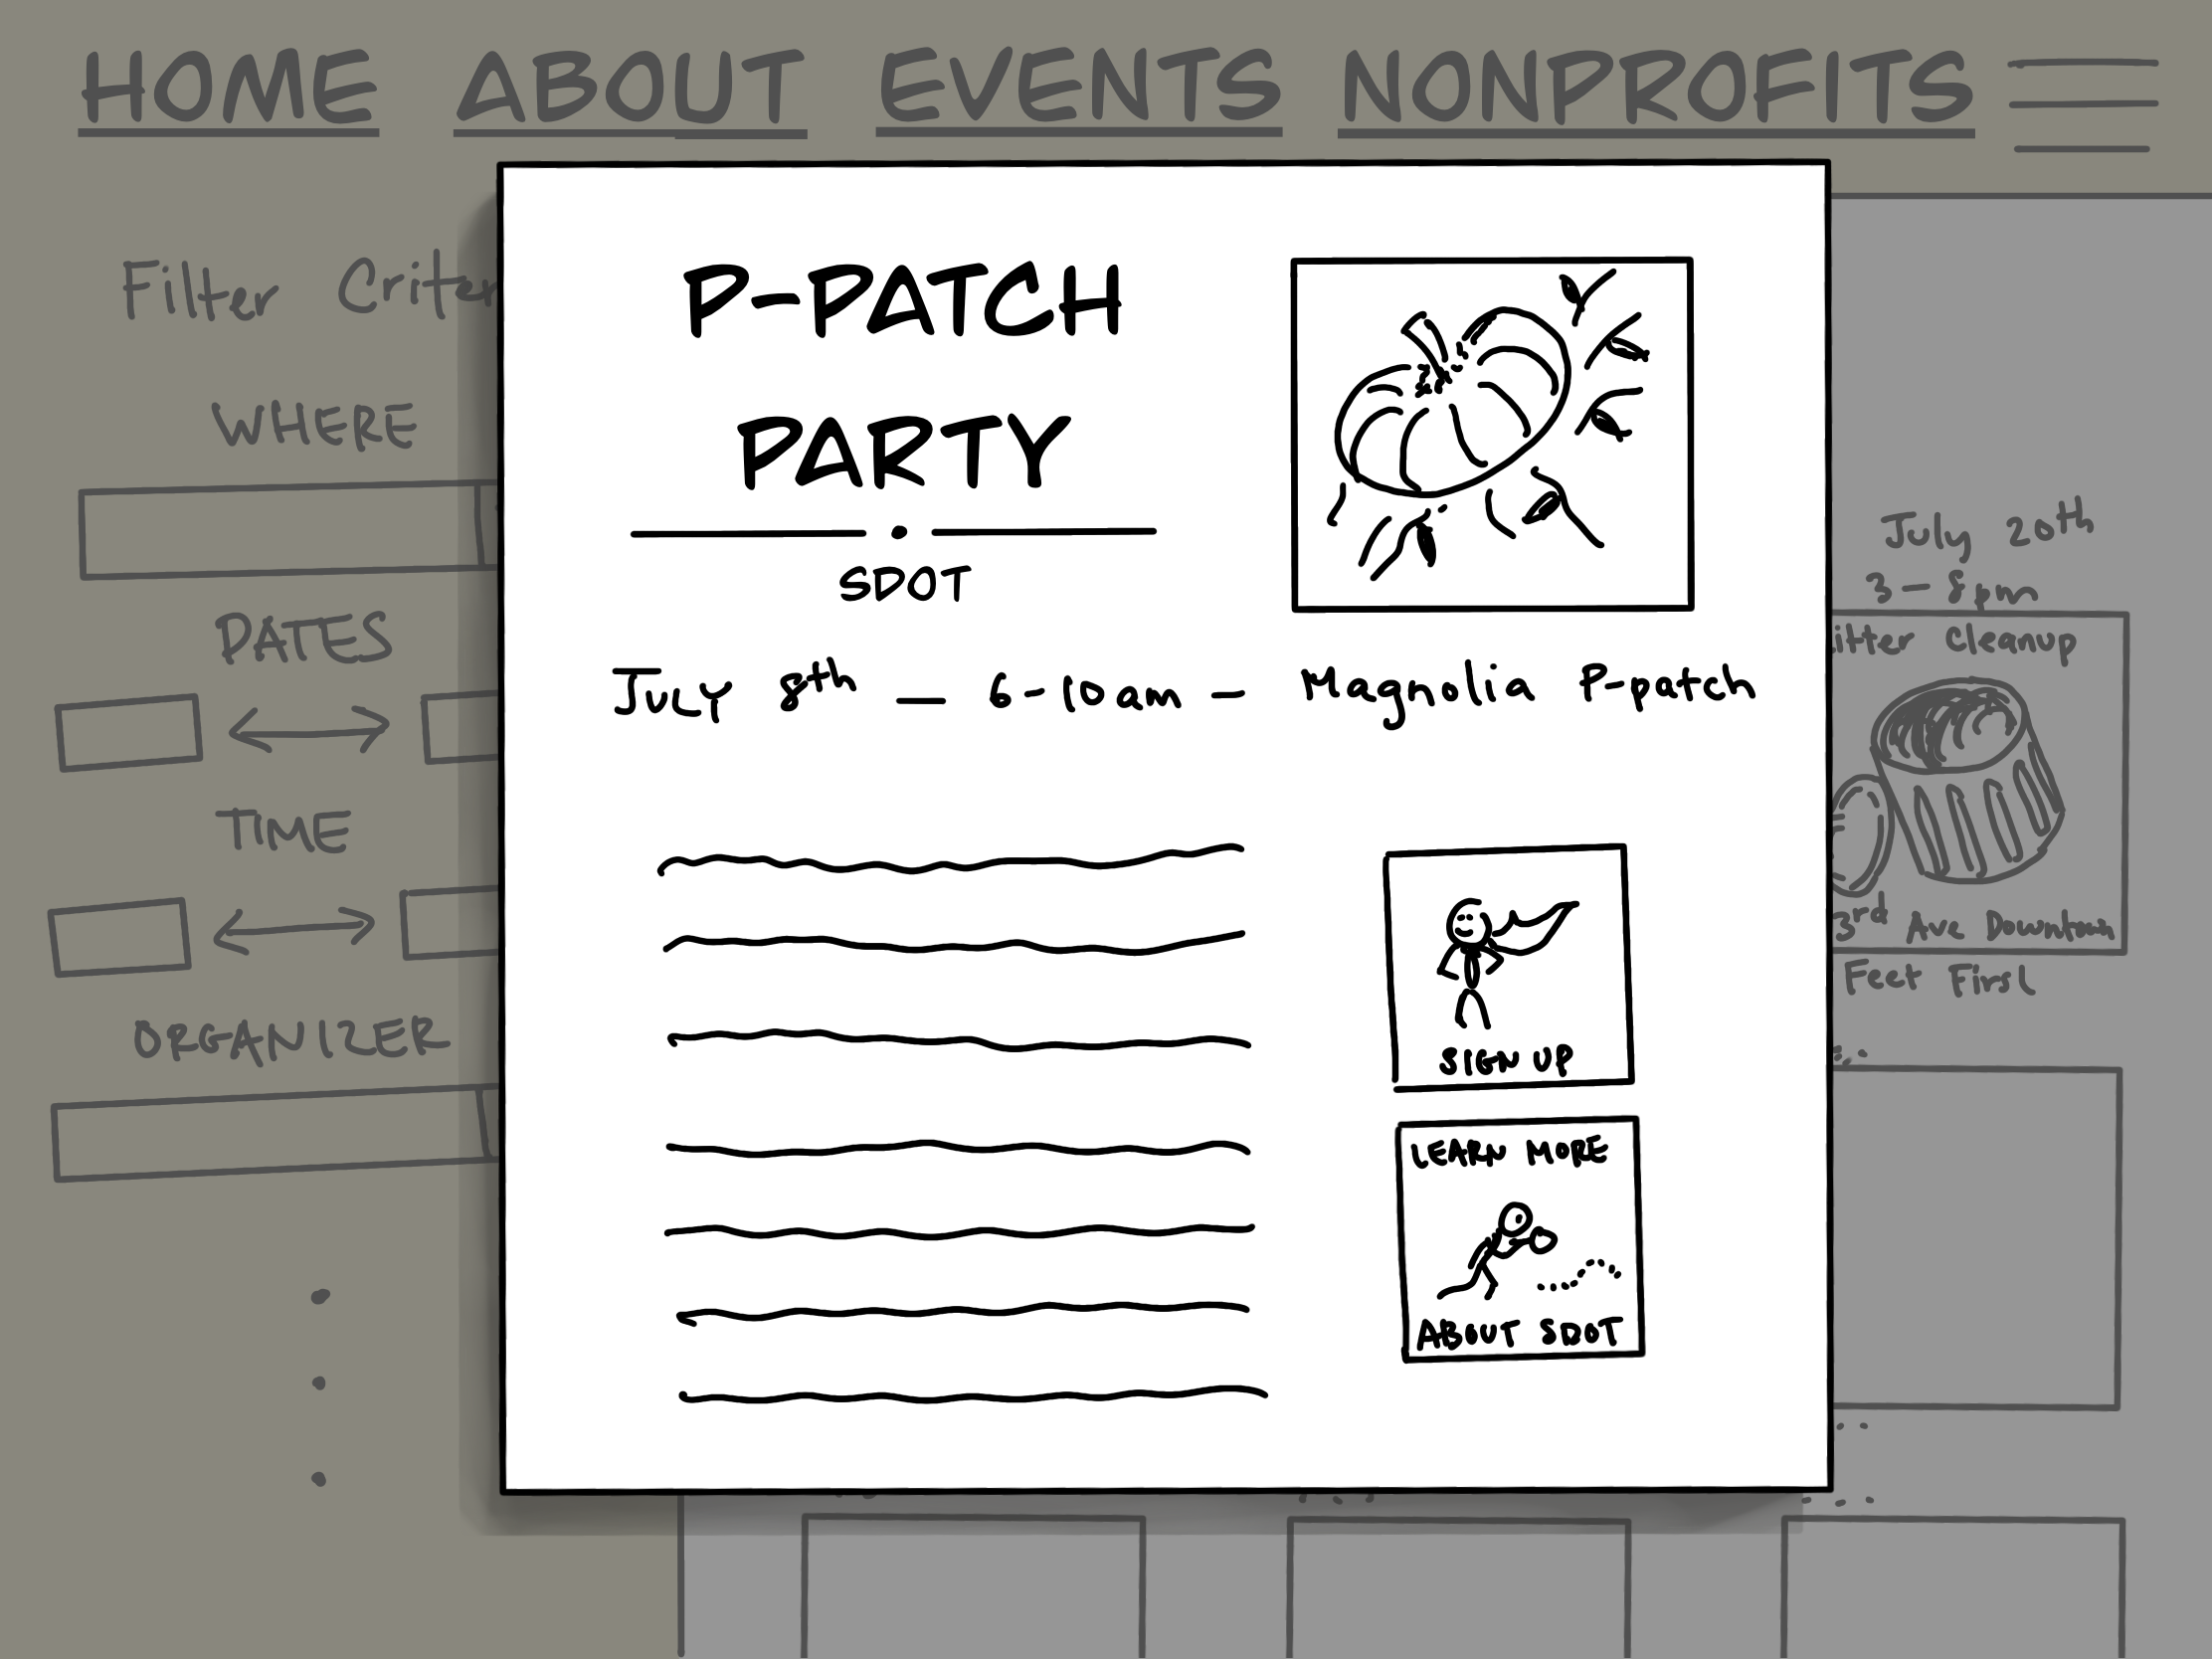 Shawn's mock up of the event details modal